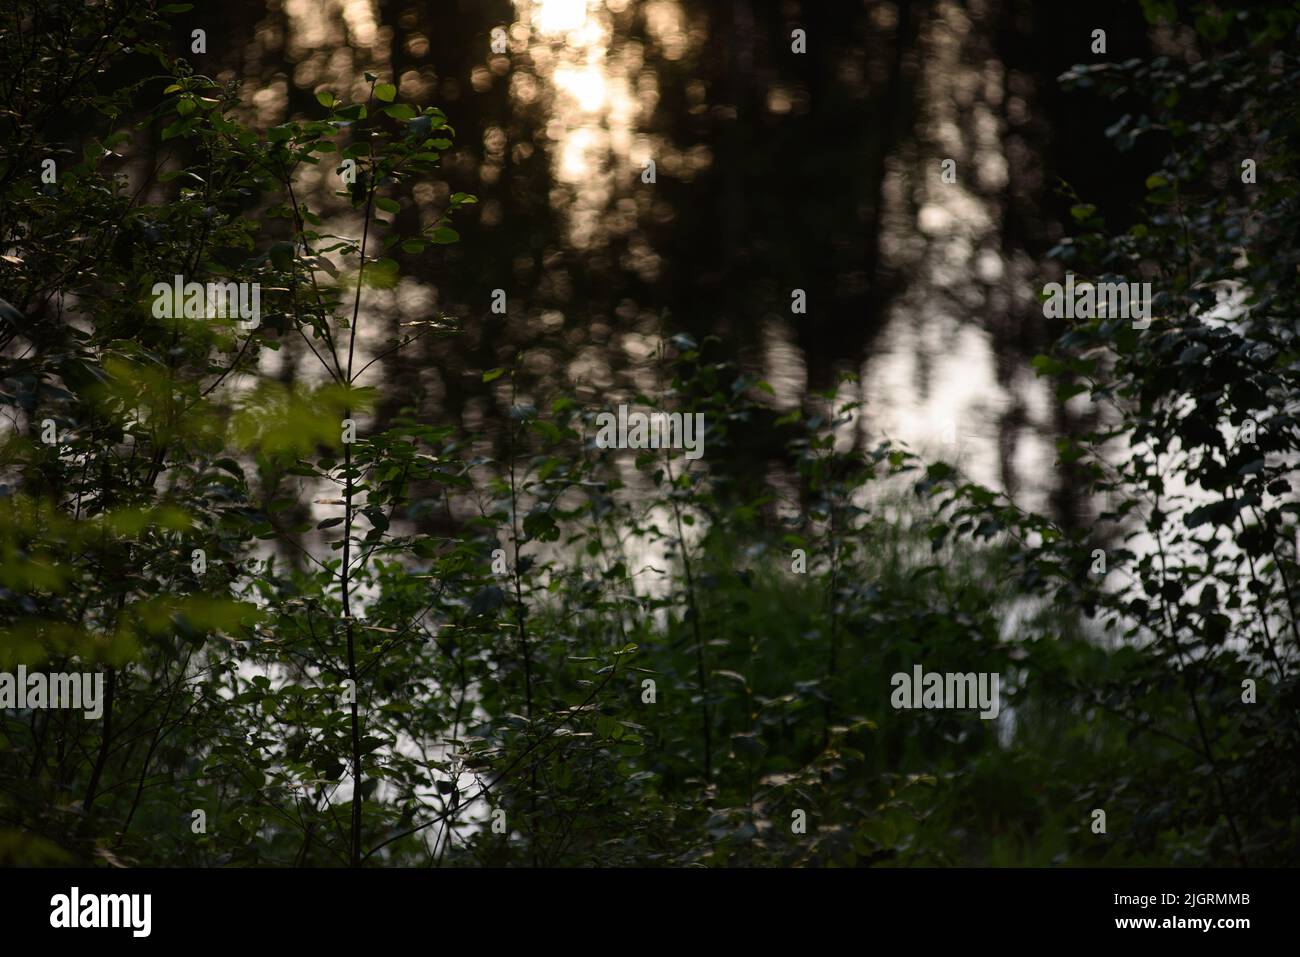 Summer forest. Tree trunks surrounded by green leaves. Stock Photo